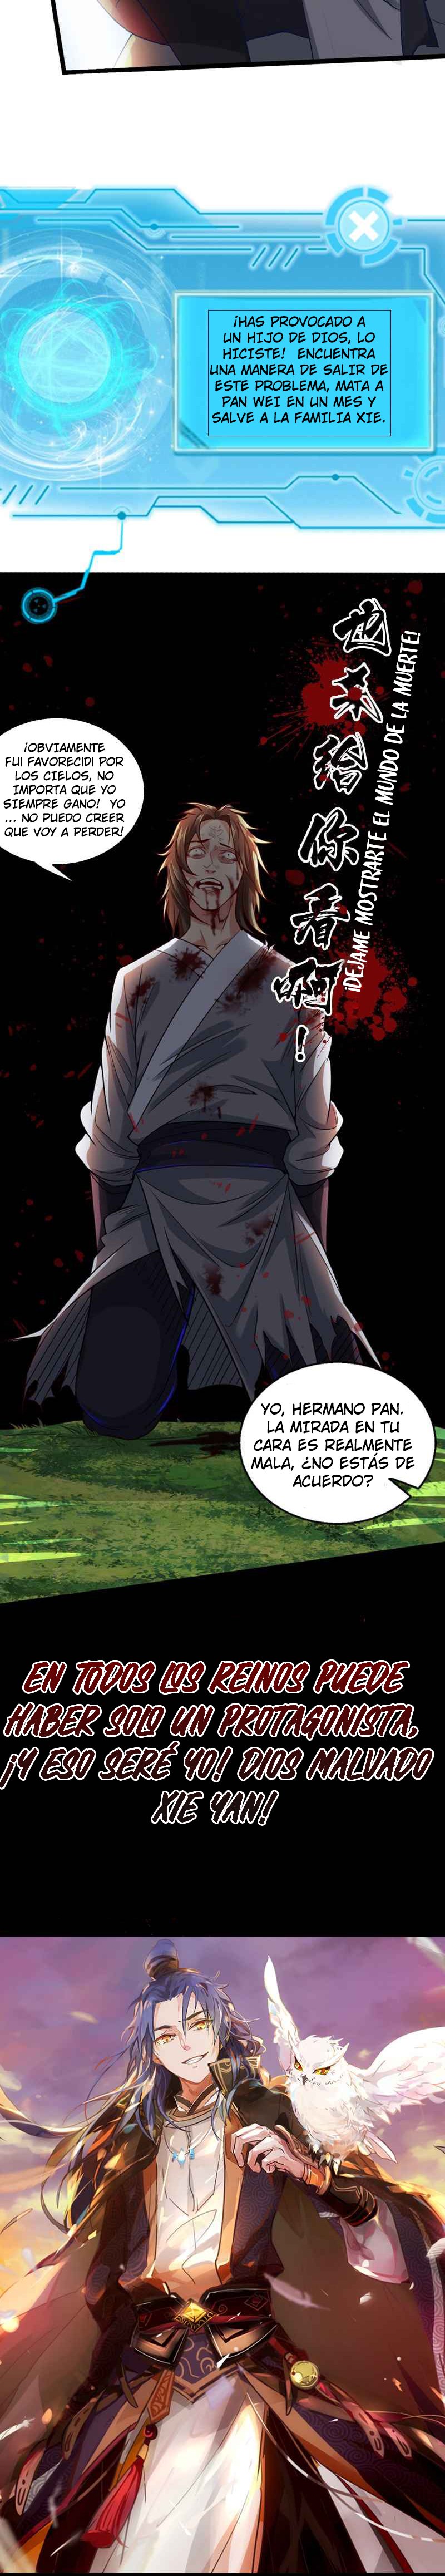 Manga Soy un dios maligno Chapter 0 image number 1